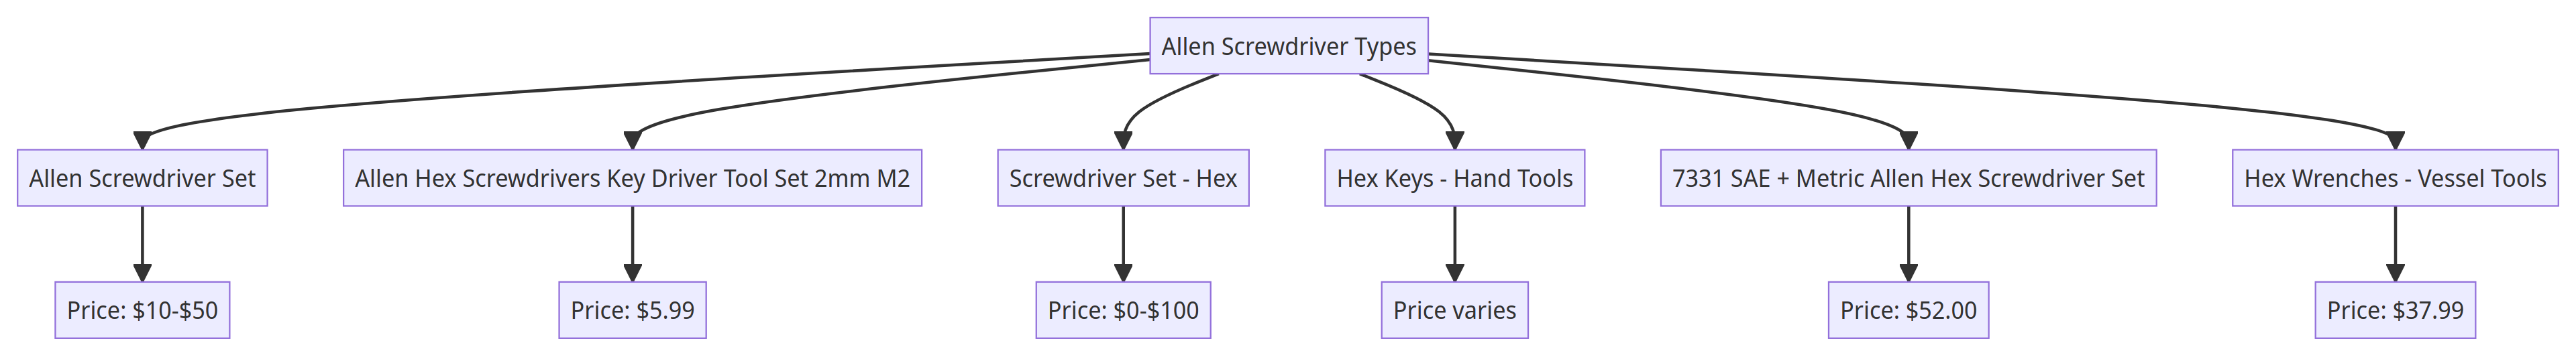 Flow Chart of Allen Screwdriver Types and Prices